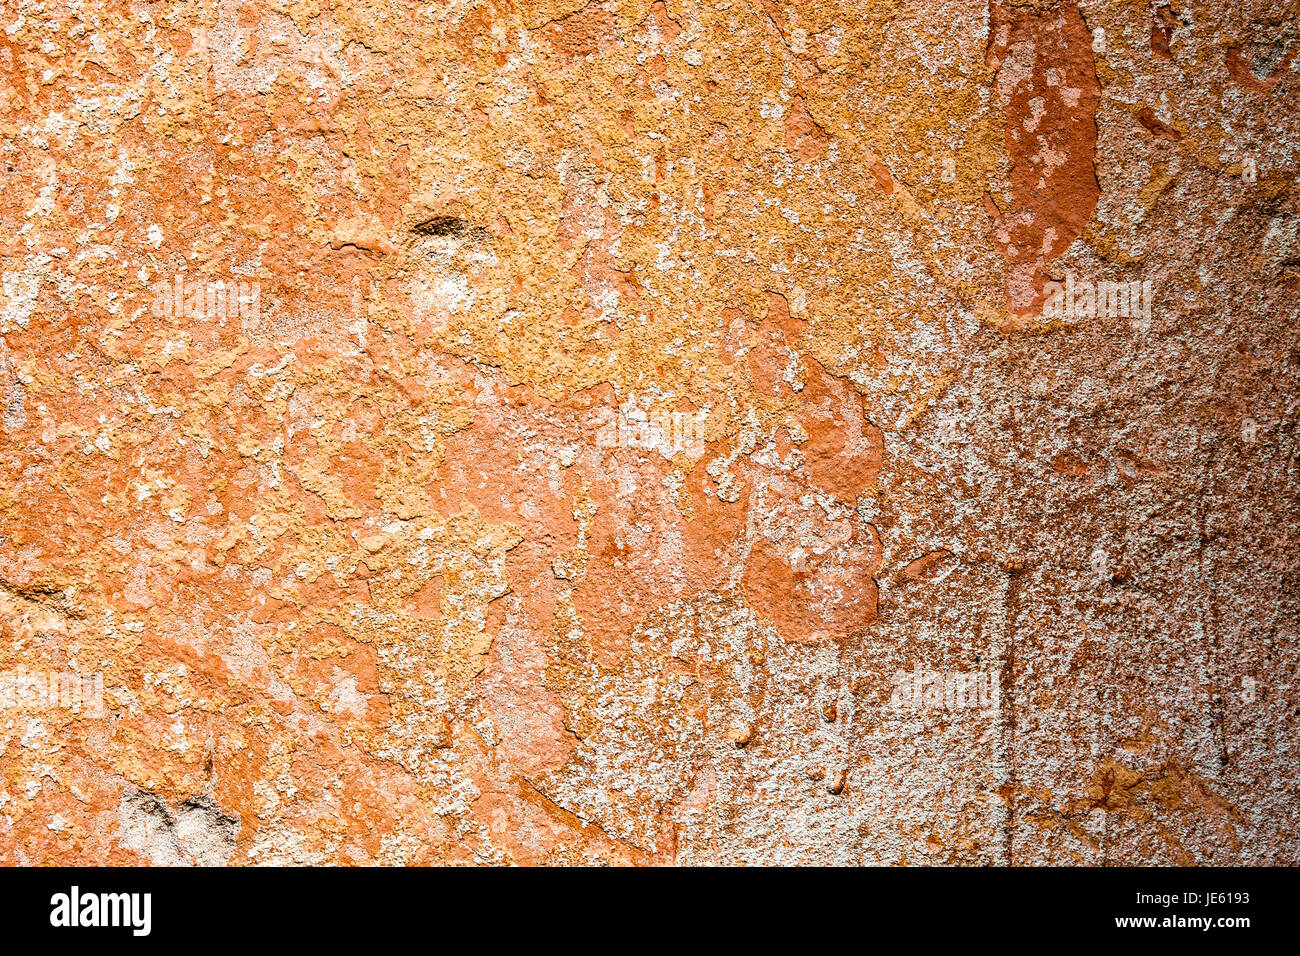 Concrete surface with the remains of orange paint and whitewash. Stock Photo